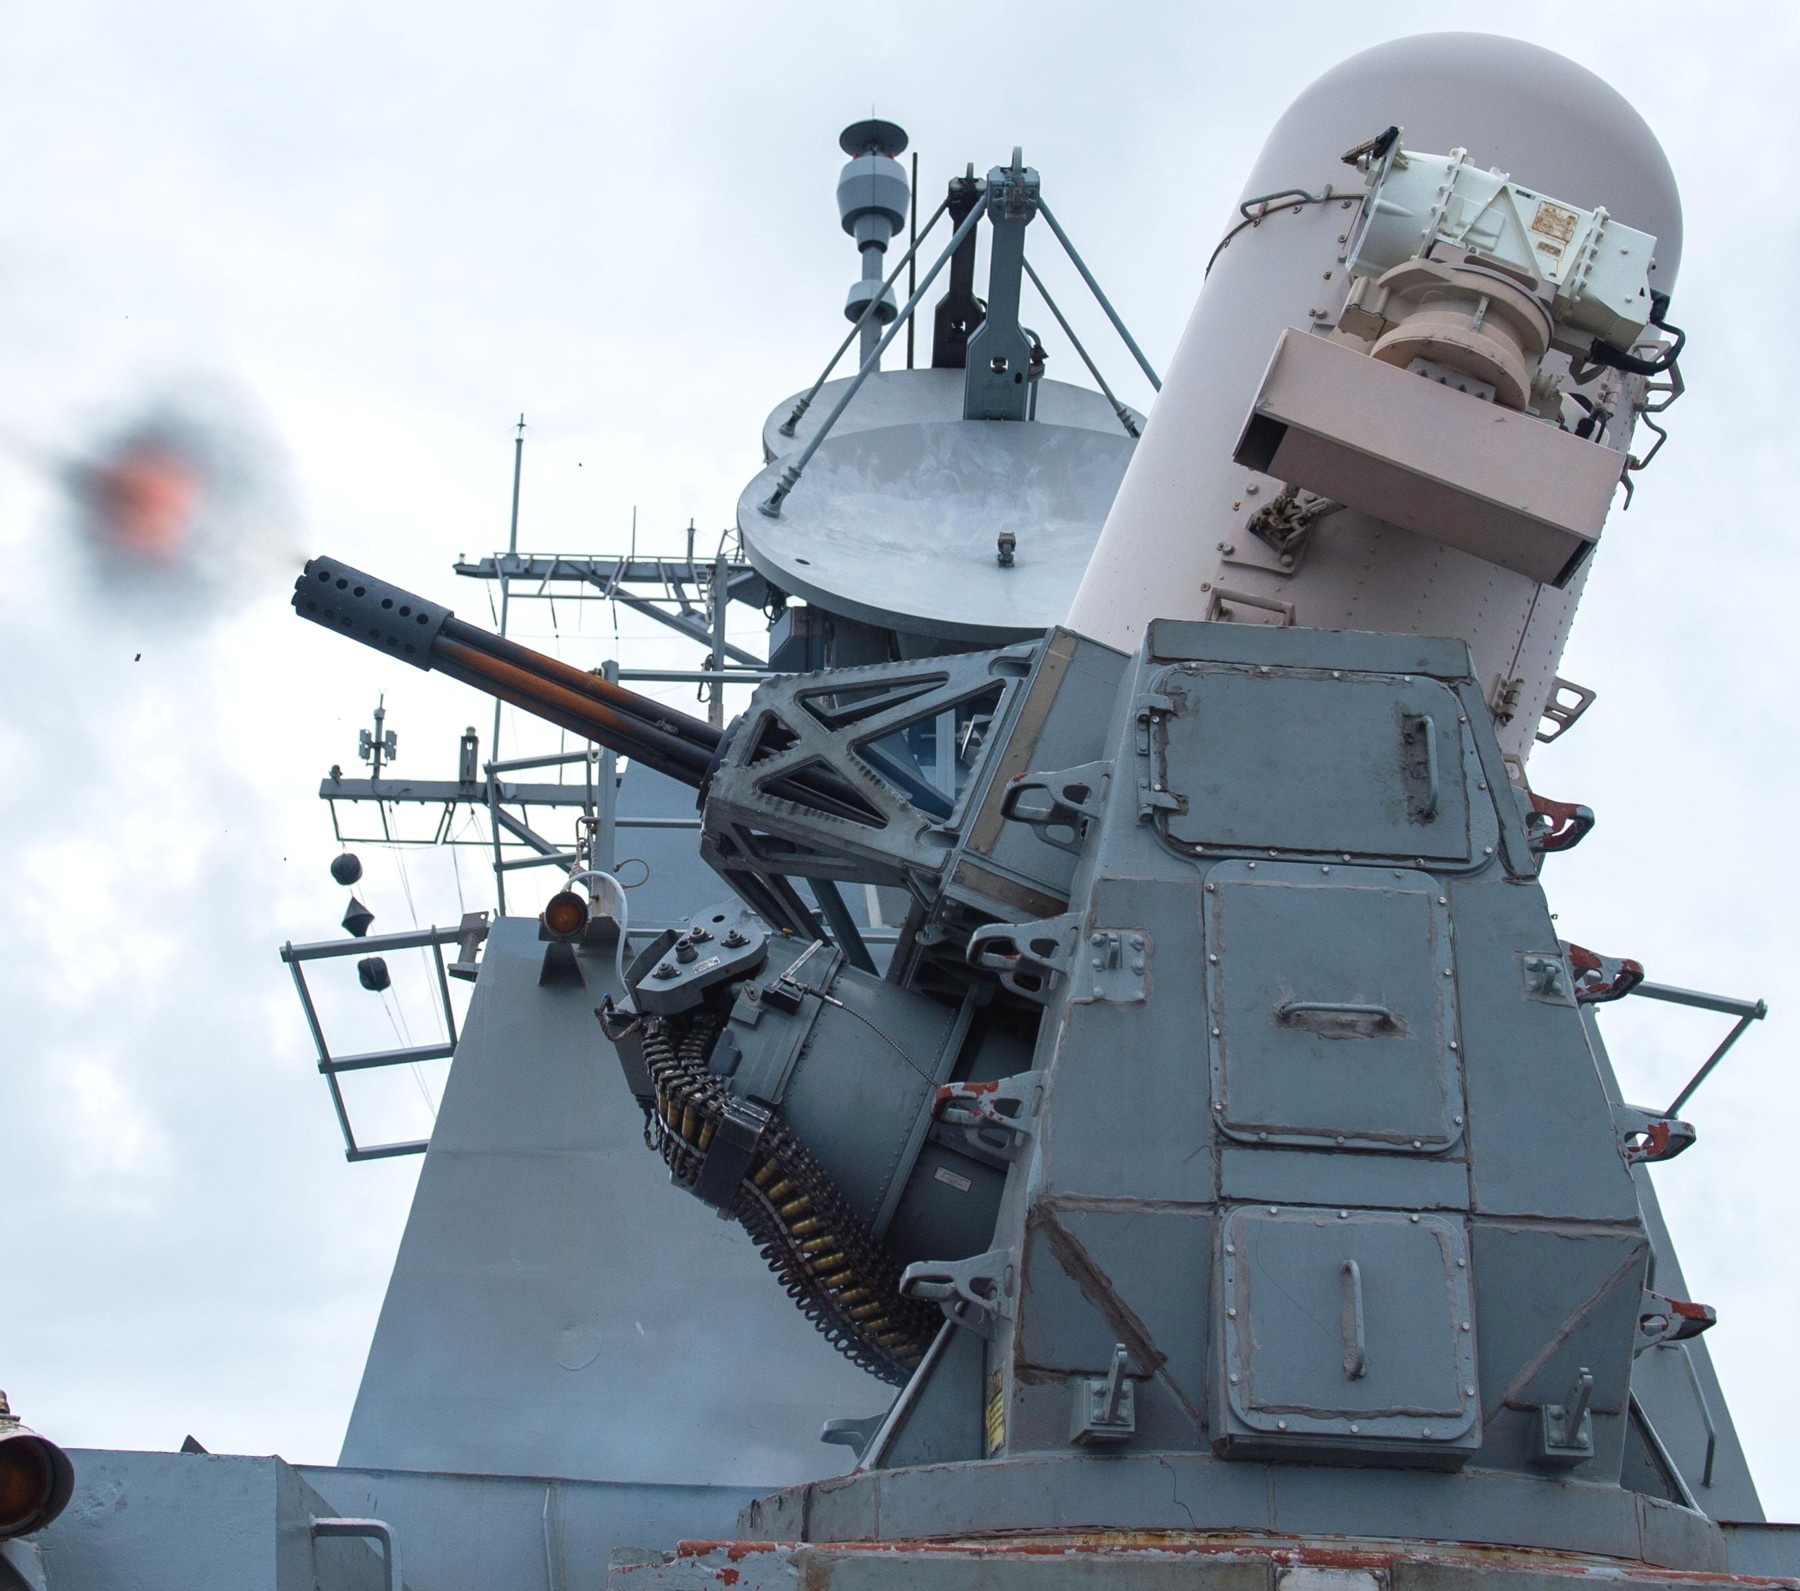 ddg-110 uss william p. lawrence arleigh burke class guided missile destroyer aegis us navy mk.15 phalanx ciws 71